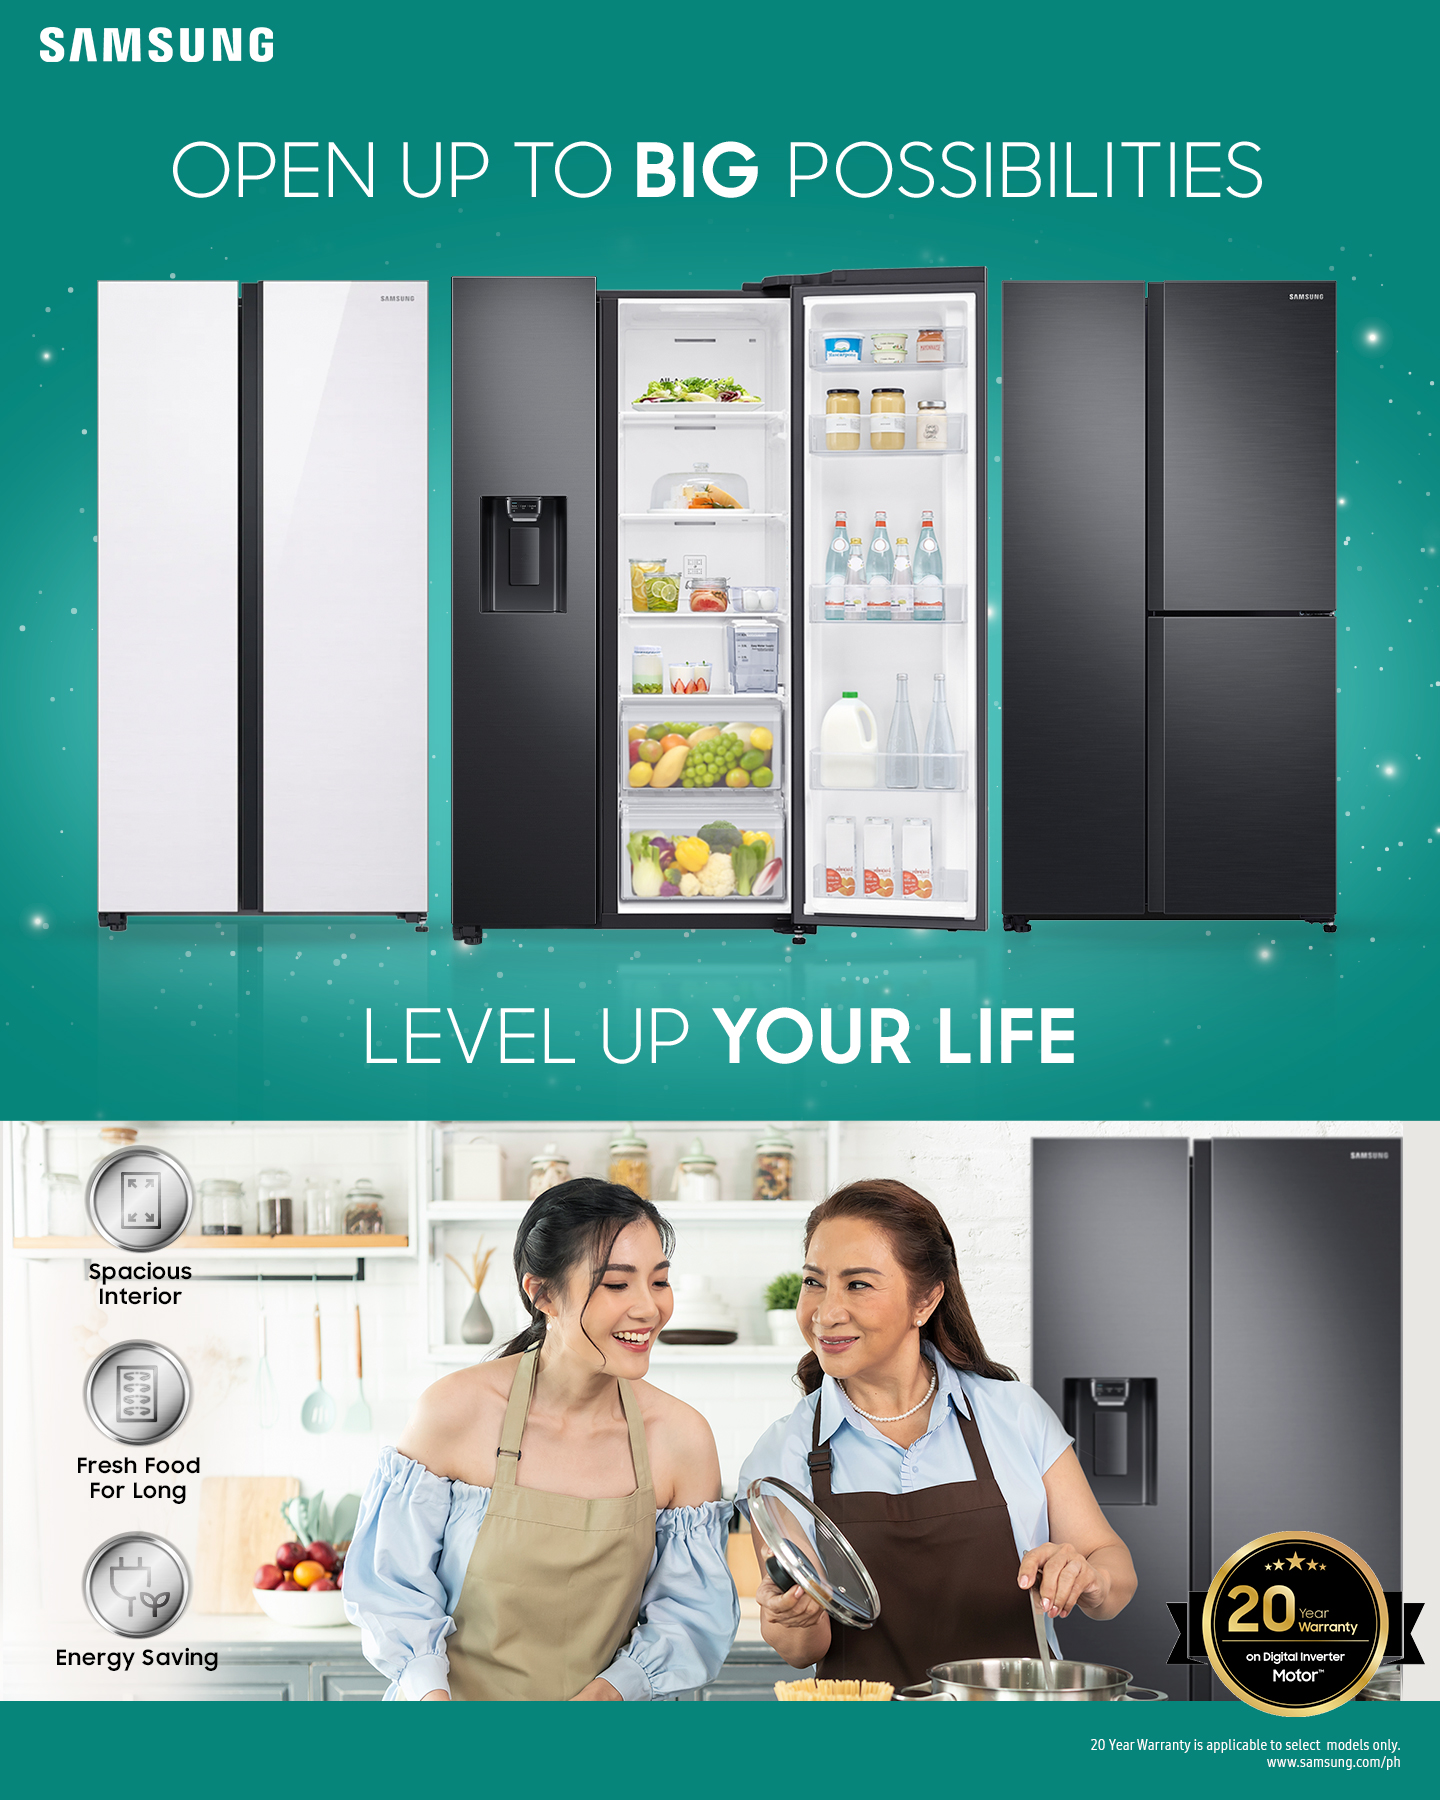 Elevate Your Home with Samsung’s Side-by-Side Refrigerators